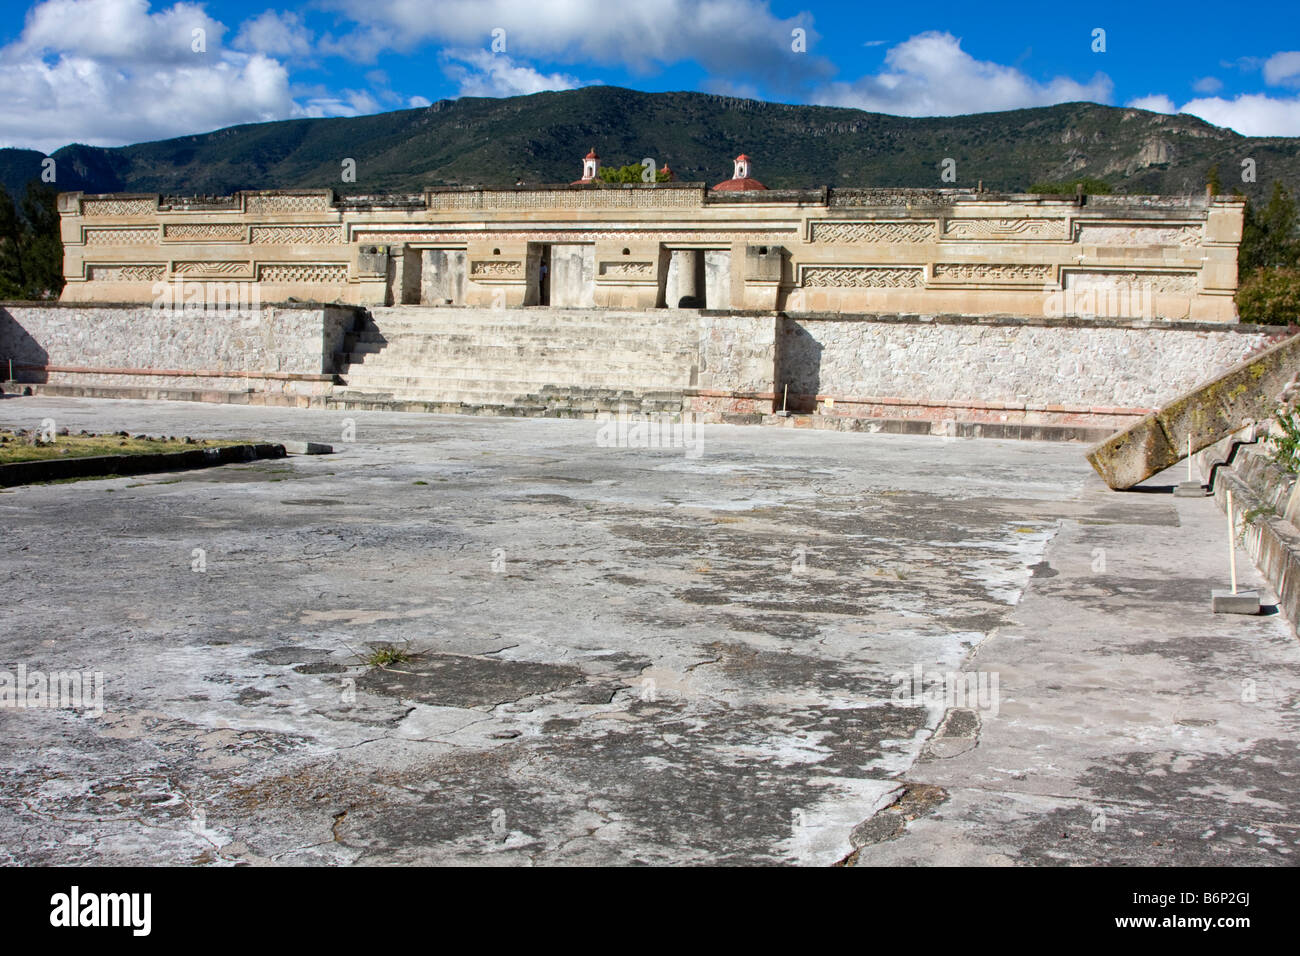 Mitla, Oaxaca, Mexico.  Zapotec Geometric Designs and Symbols Decorate the Construction of the Palace and the Courtyards. Stock Photo